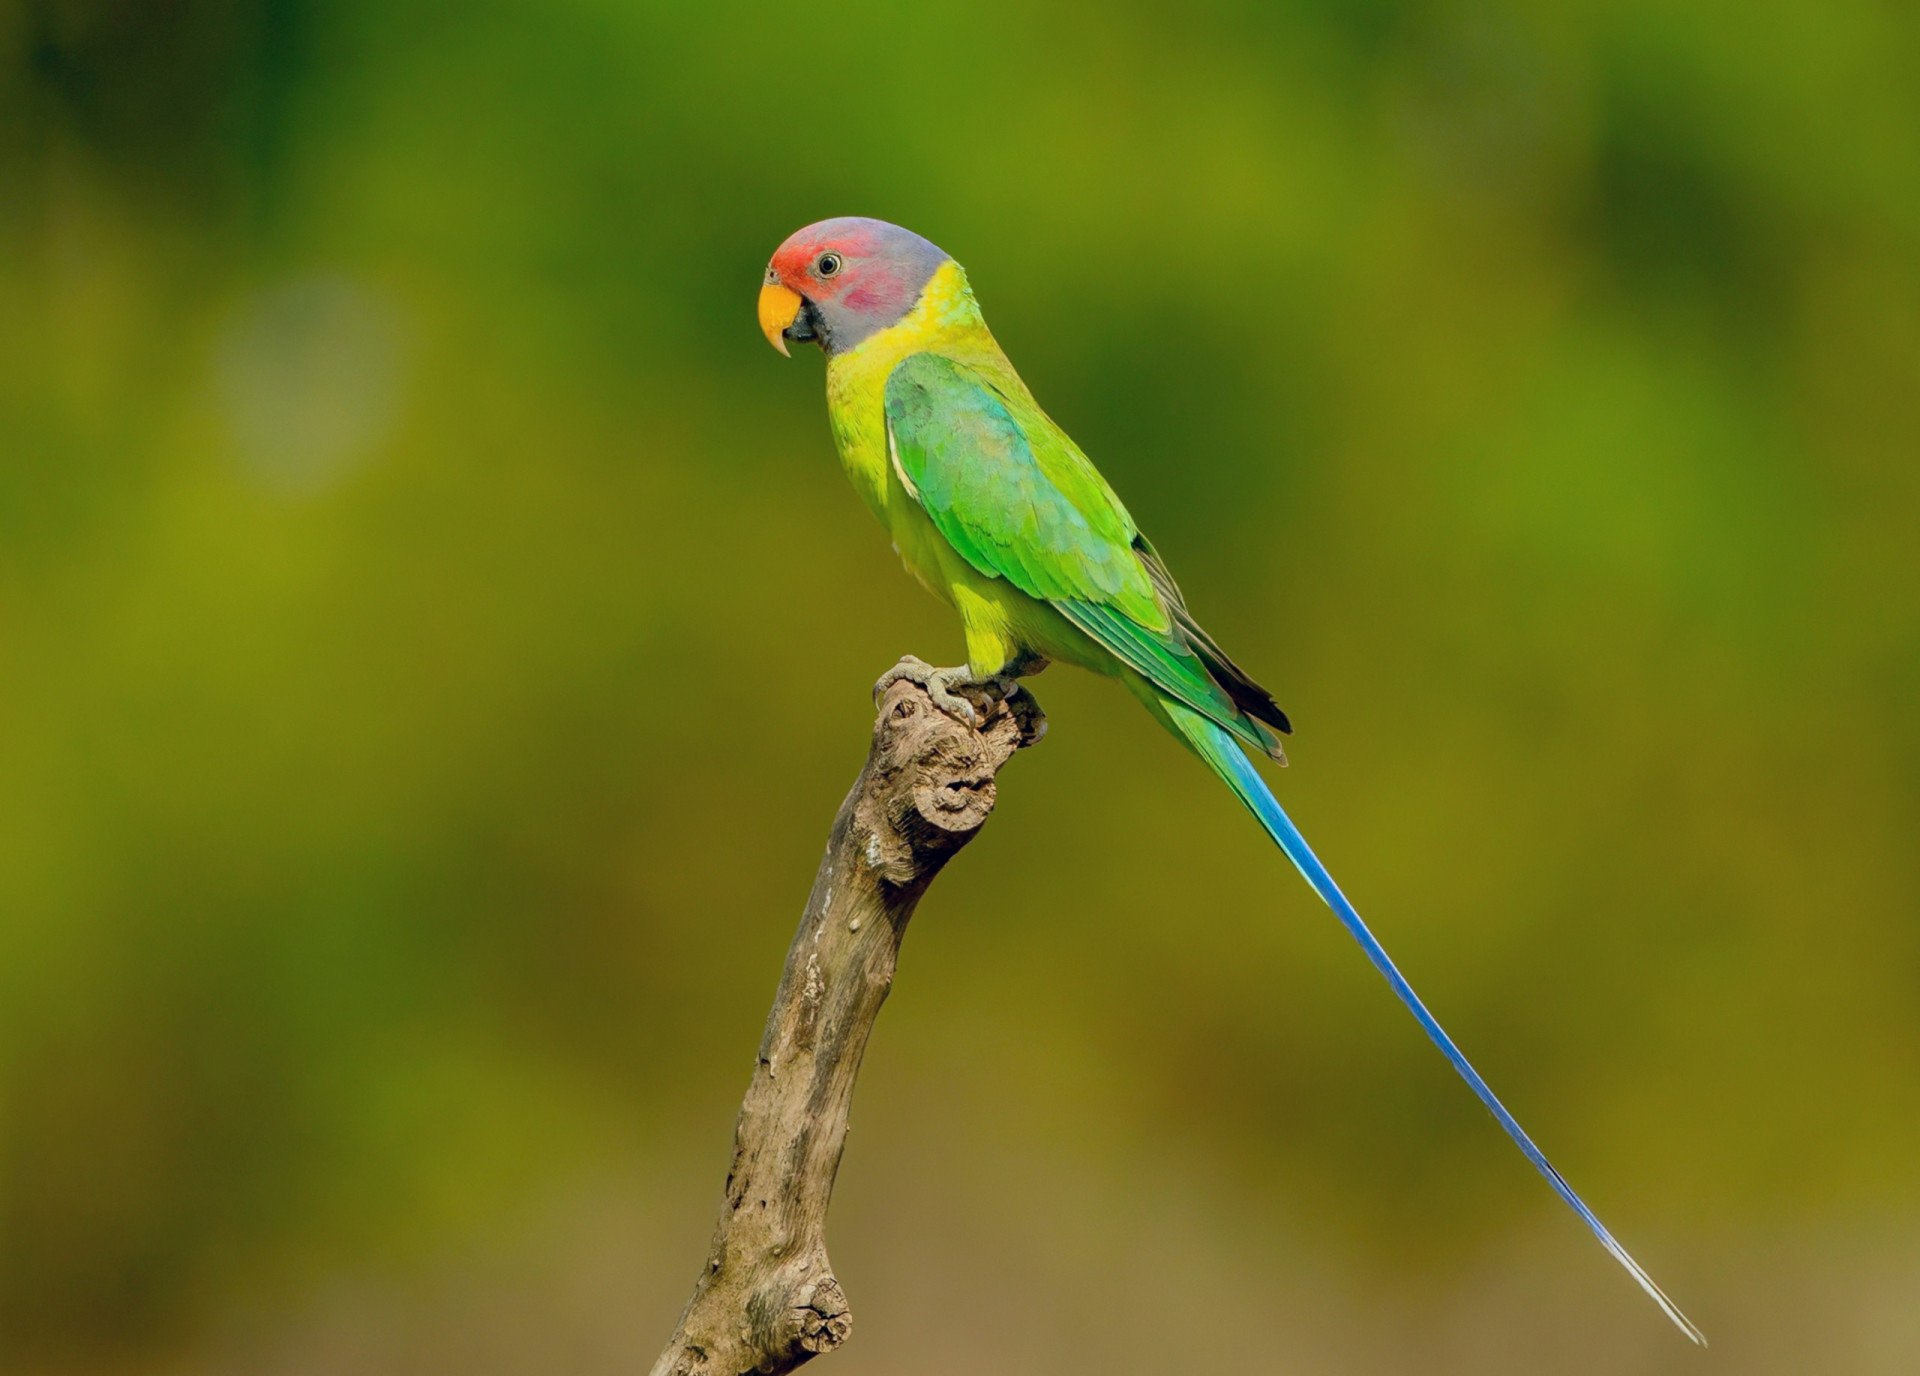 <p>One of the West Baratang Group of the Andaman Islands, Parrot Island is, as the name suggests, famous for its colorful birdlife. Tourists flock to this uninhabited island to hear the evening calls of thousands of parrots.</p><p><a href="https://www.msn.com/en-my/community/channel/vid-7xx8mnucu55yw63we9va2gwr7uihbxwc68fxqp25x6tg4ftibpra?cvid=94631541bc0f4f89bfd59158d696ad7e">Follow us and access great exclusive content every day</a></p>